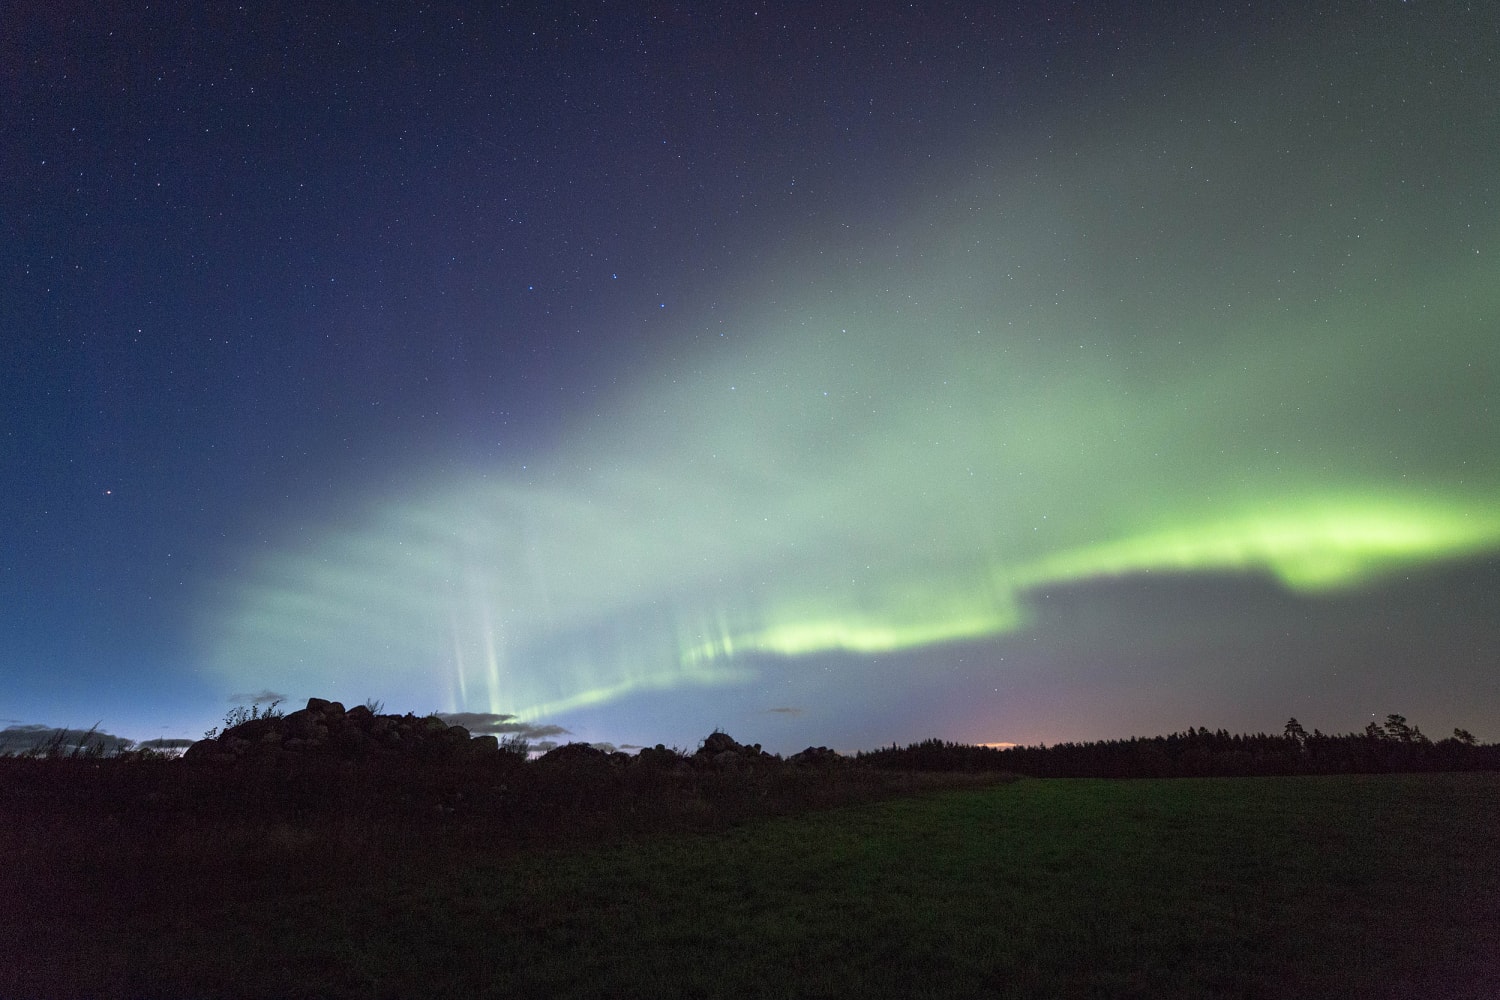 A new aurora? Researchers say 'the dunes' like the usual lights in the sky